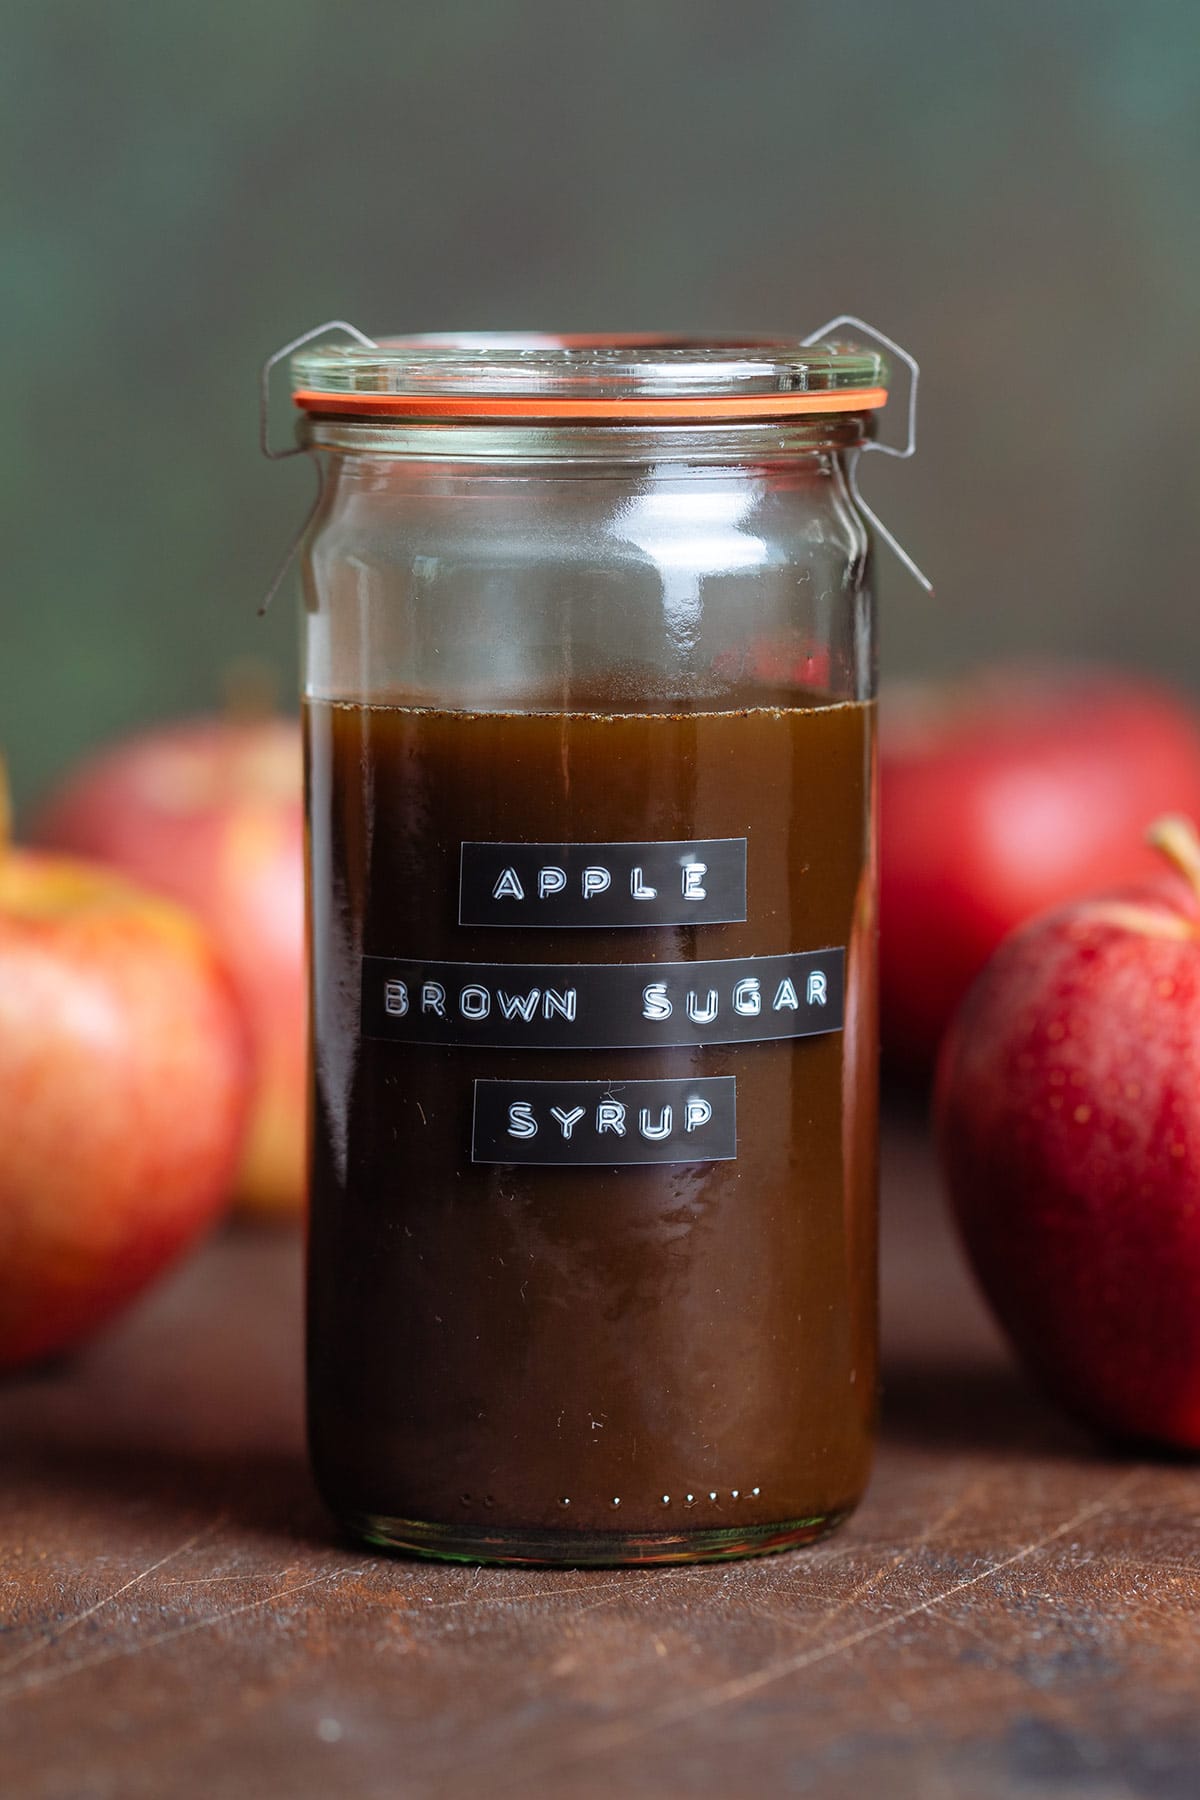 Brown syrup in a glass jar with a label on it that says Apple Brown Sugar Syrup with apples around it on a dark wooden background.